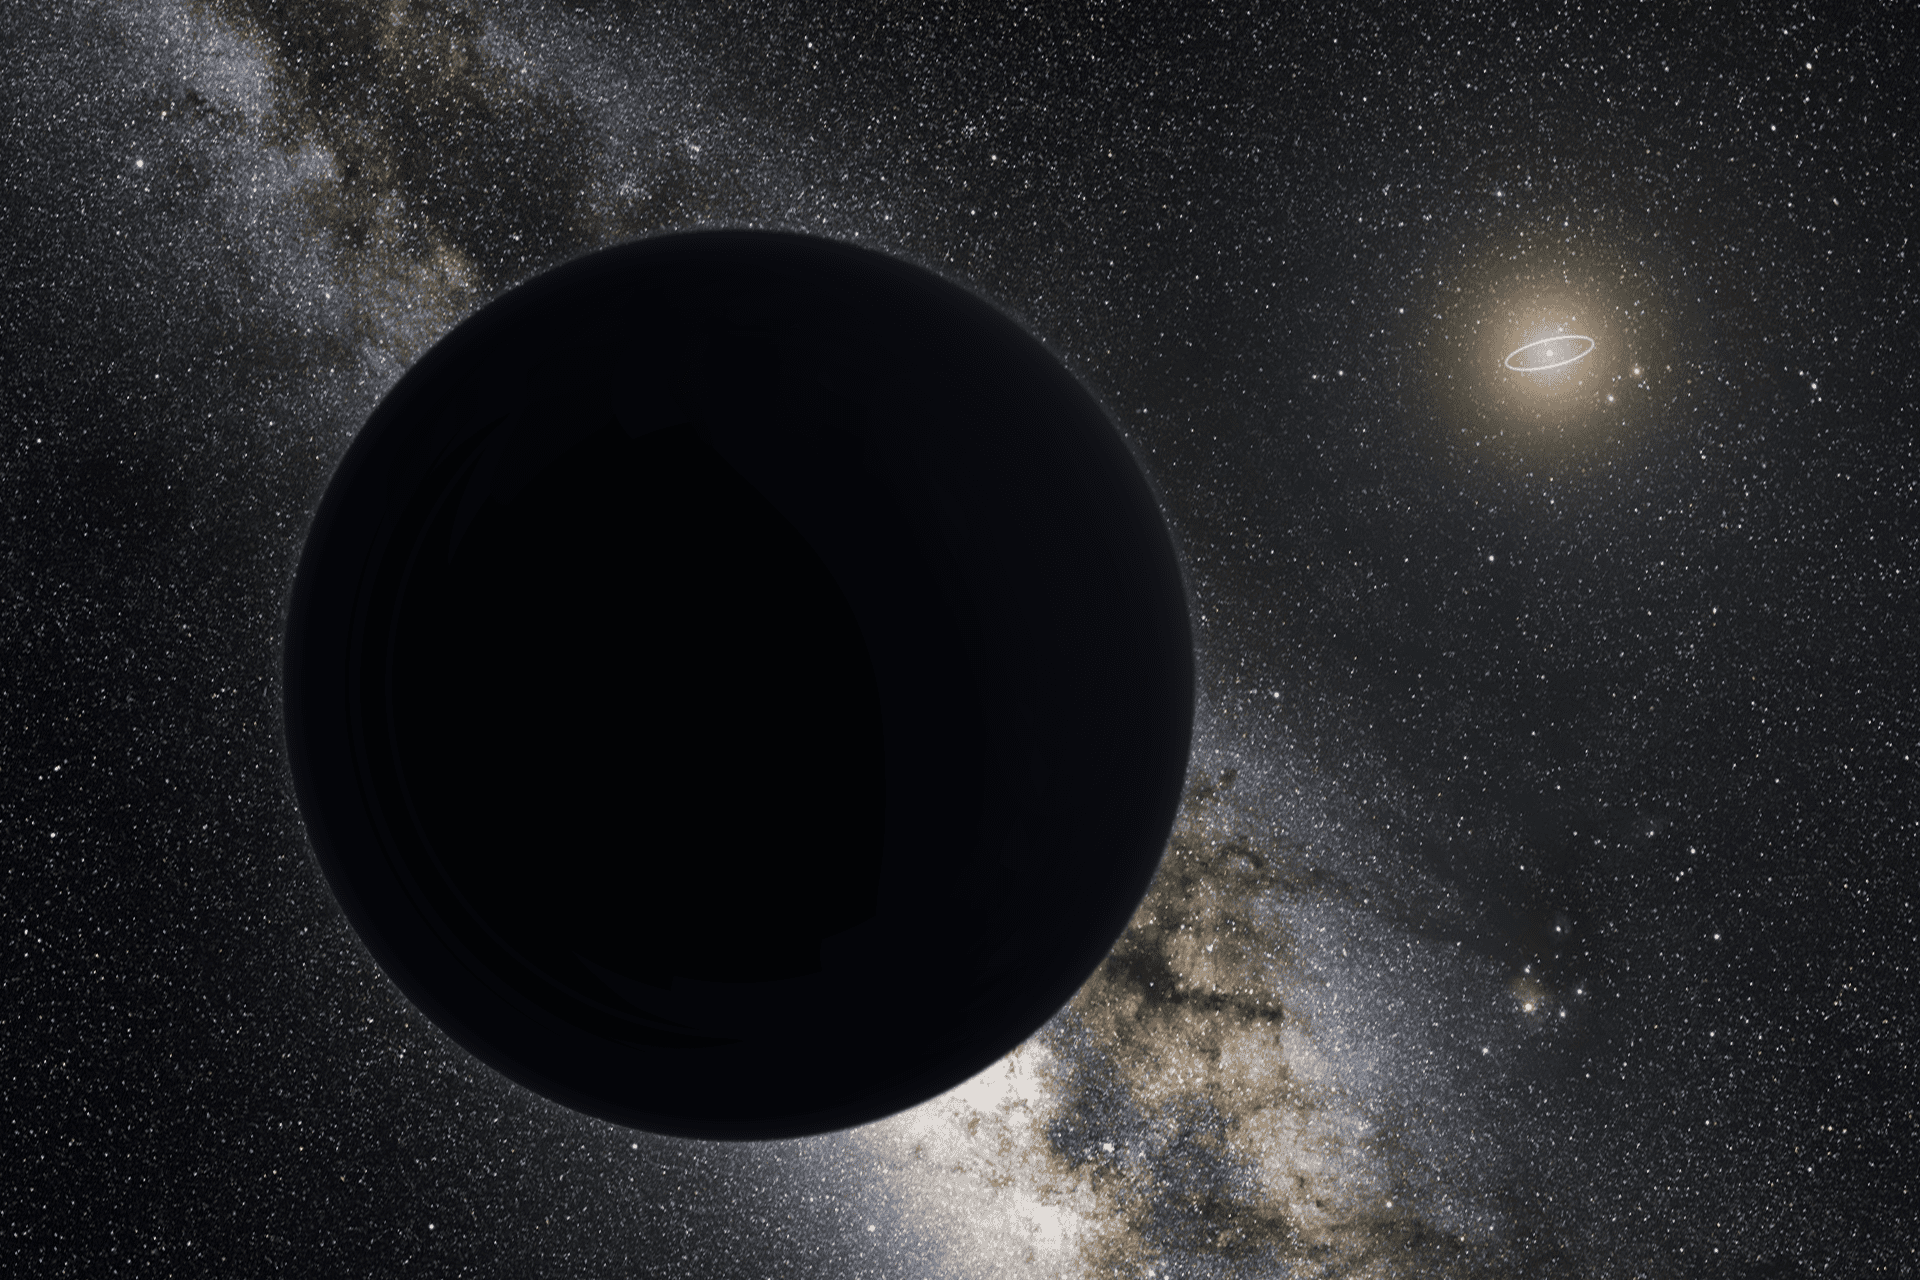 Artist's impression of Planet Nine as an ice giant eclipsing the central Milky Way, with a star-like Sun in the distance. Neptune's orbit is shown as a small ellipse around the Sun. The sky view and appearance are based on the conjectures of its co-proposer, Mike Brown. Credit: Tom Ruen, Wikimedia Commons.